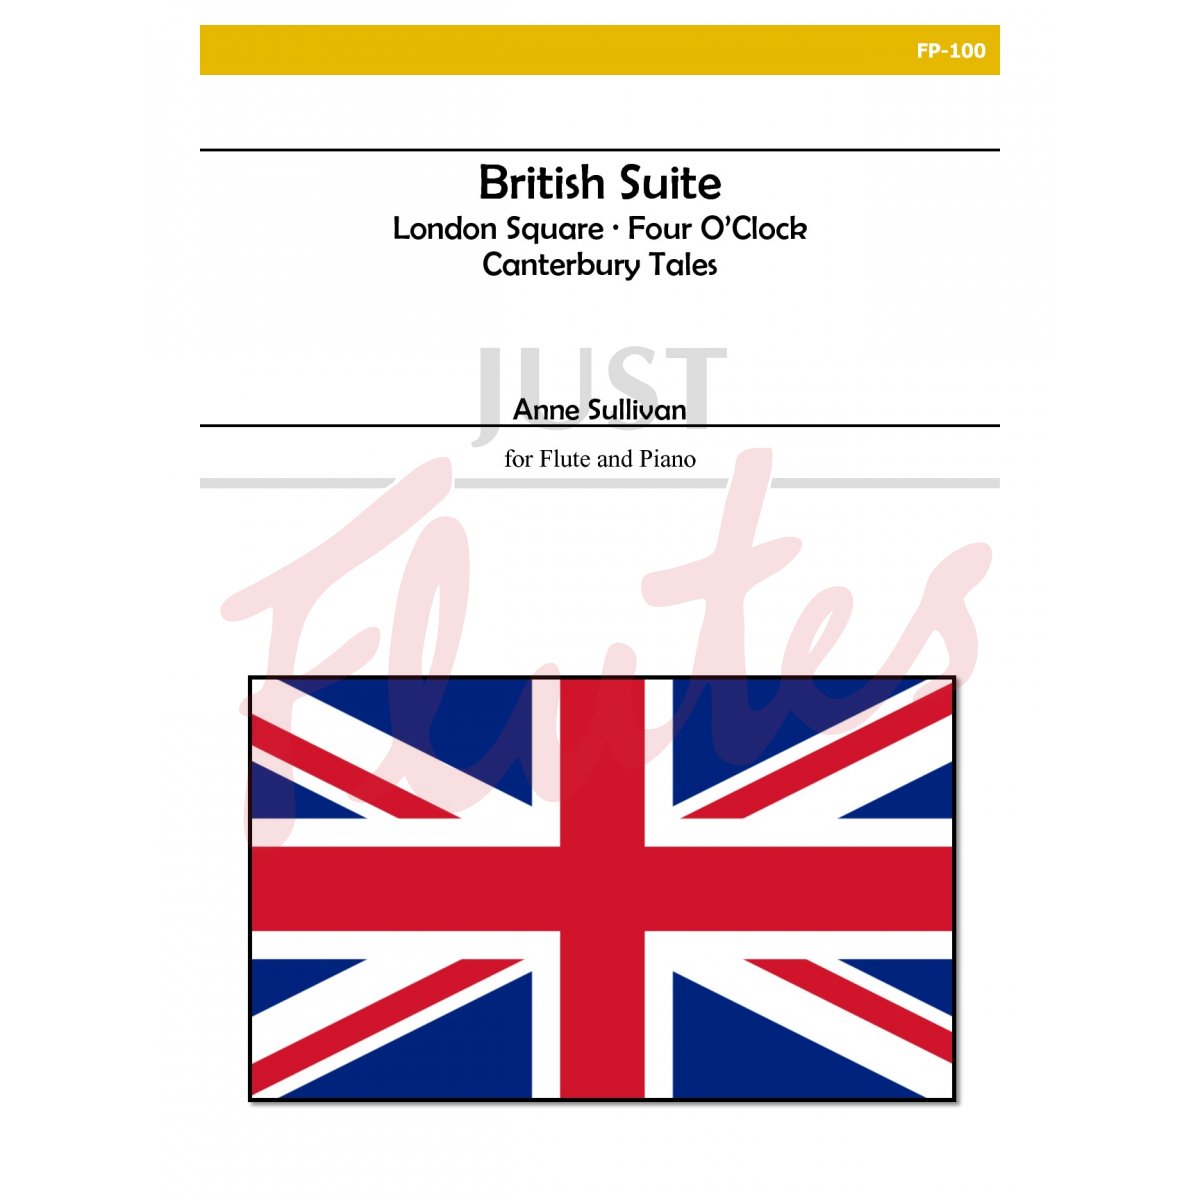 British Suite for Flute and Piano